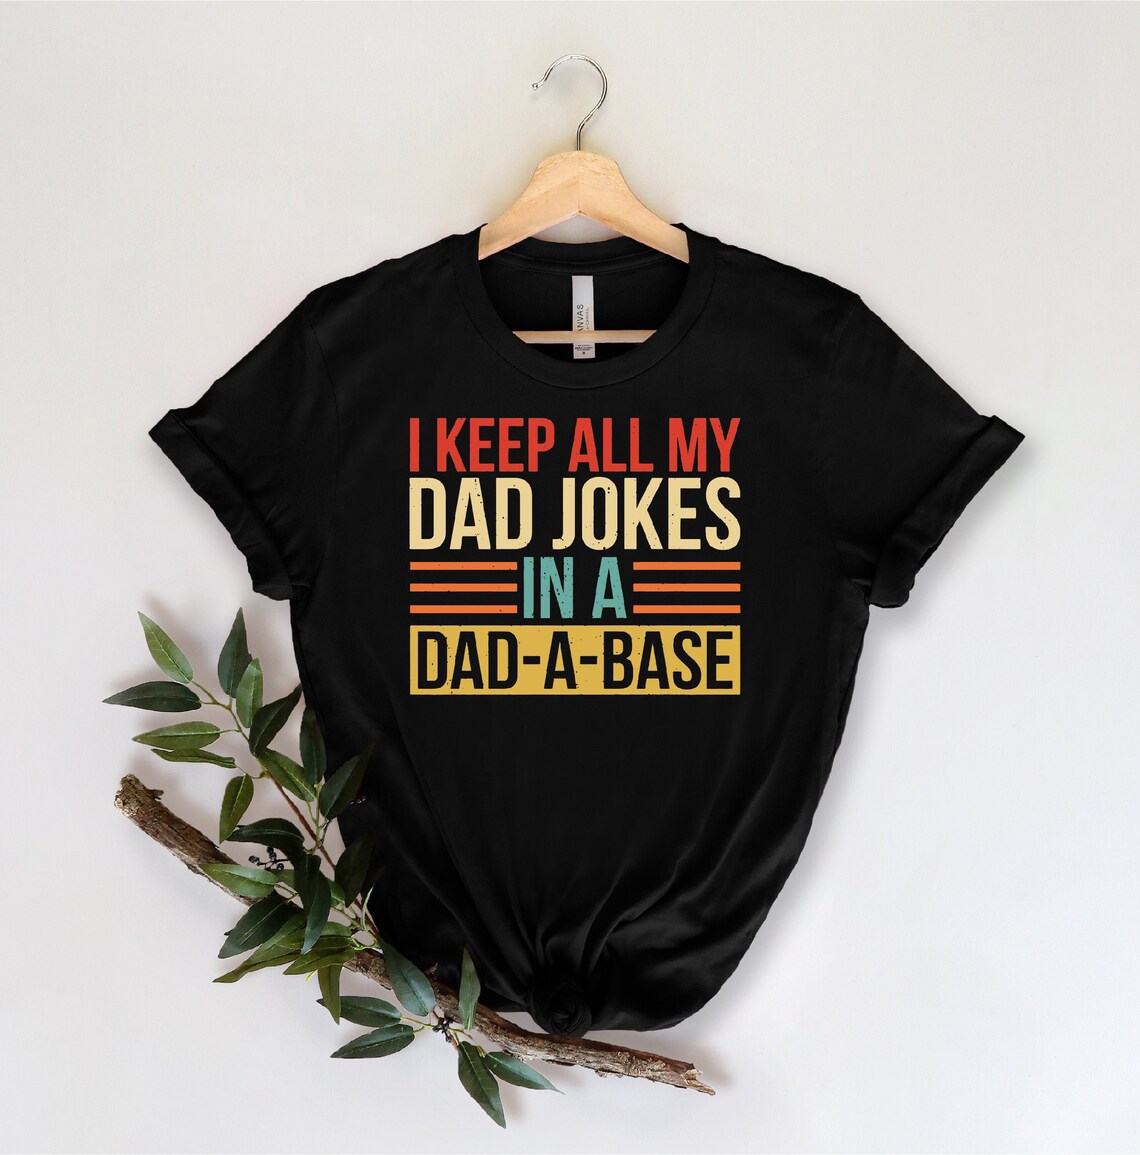 I Keep All My Bad Jokes In A Dadabase Funny